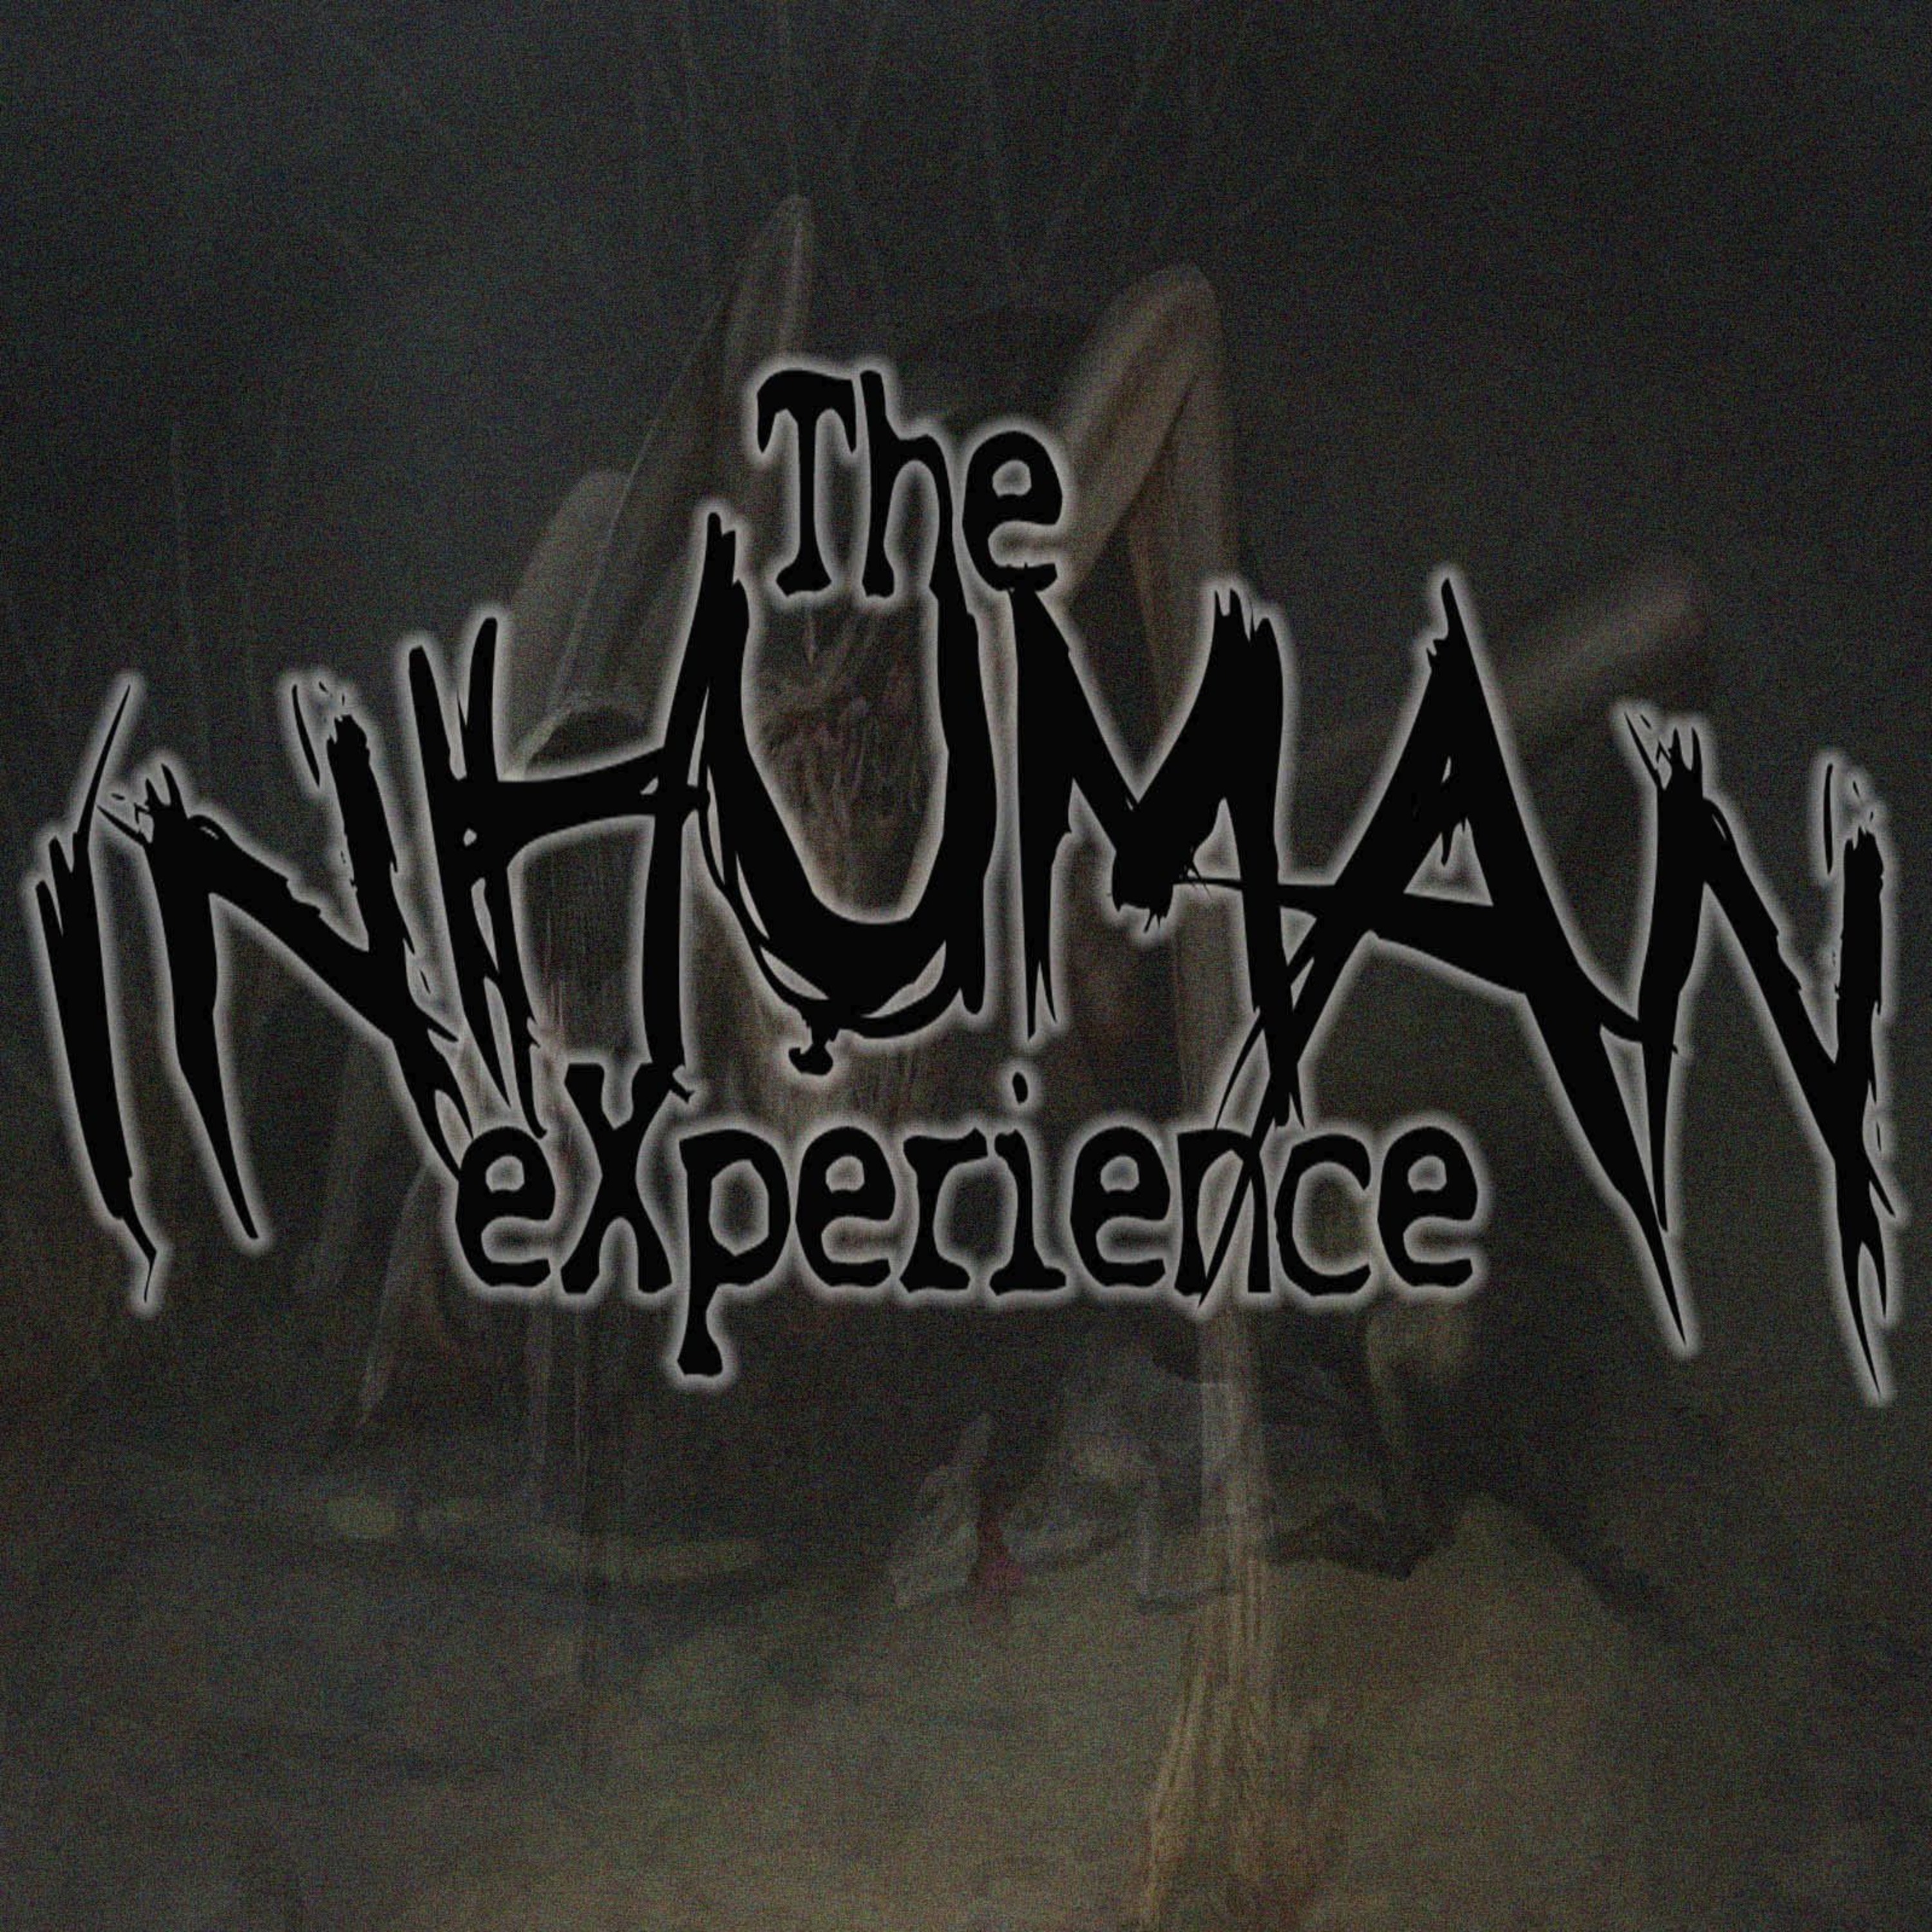 12. eXhibit #11 The Inhuman eXperiment with Bobby Ballad and Jack Knivez